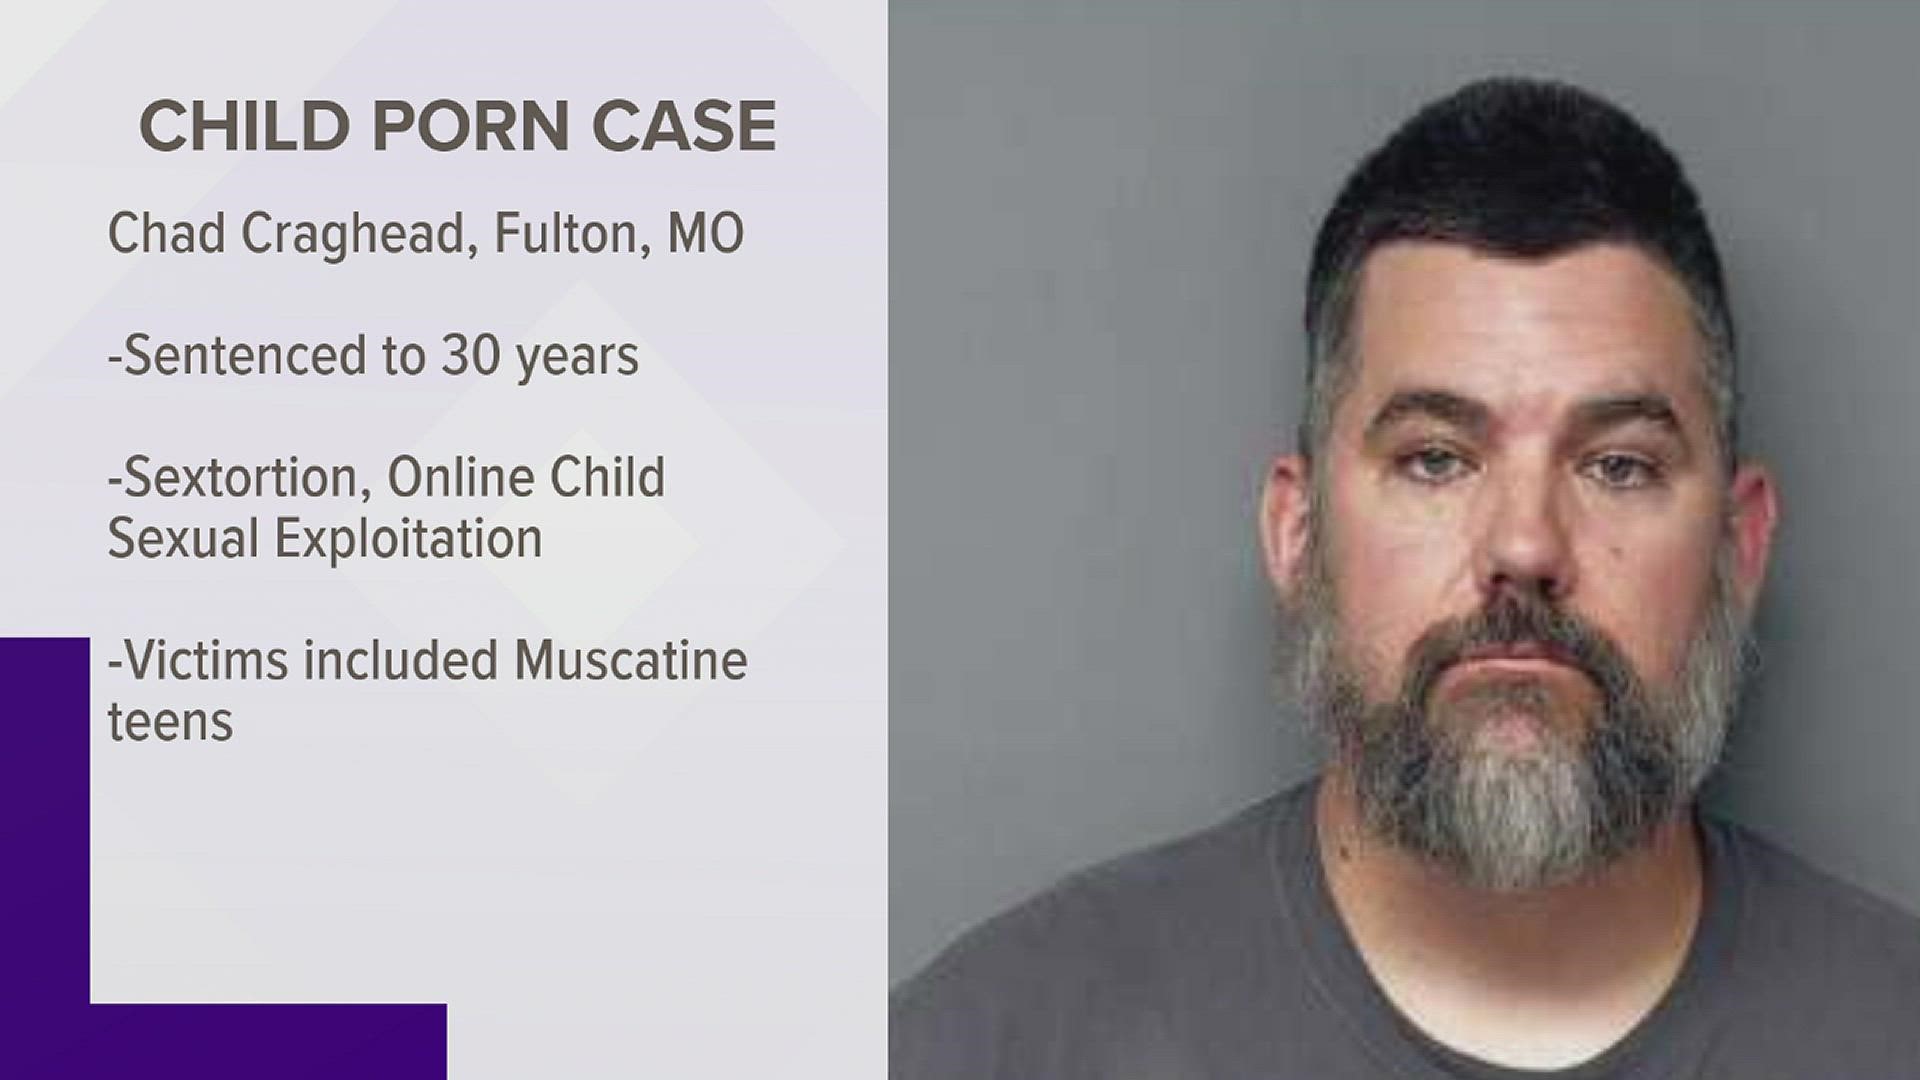 Chad Craghead, a Missouri teacher and coach, was arrested in June 2021 for the sextortion and cyberstalking of two Muscatine high schoolers.